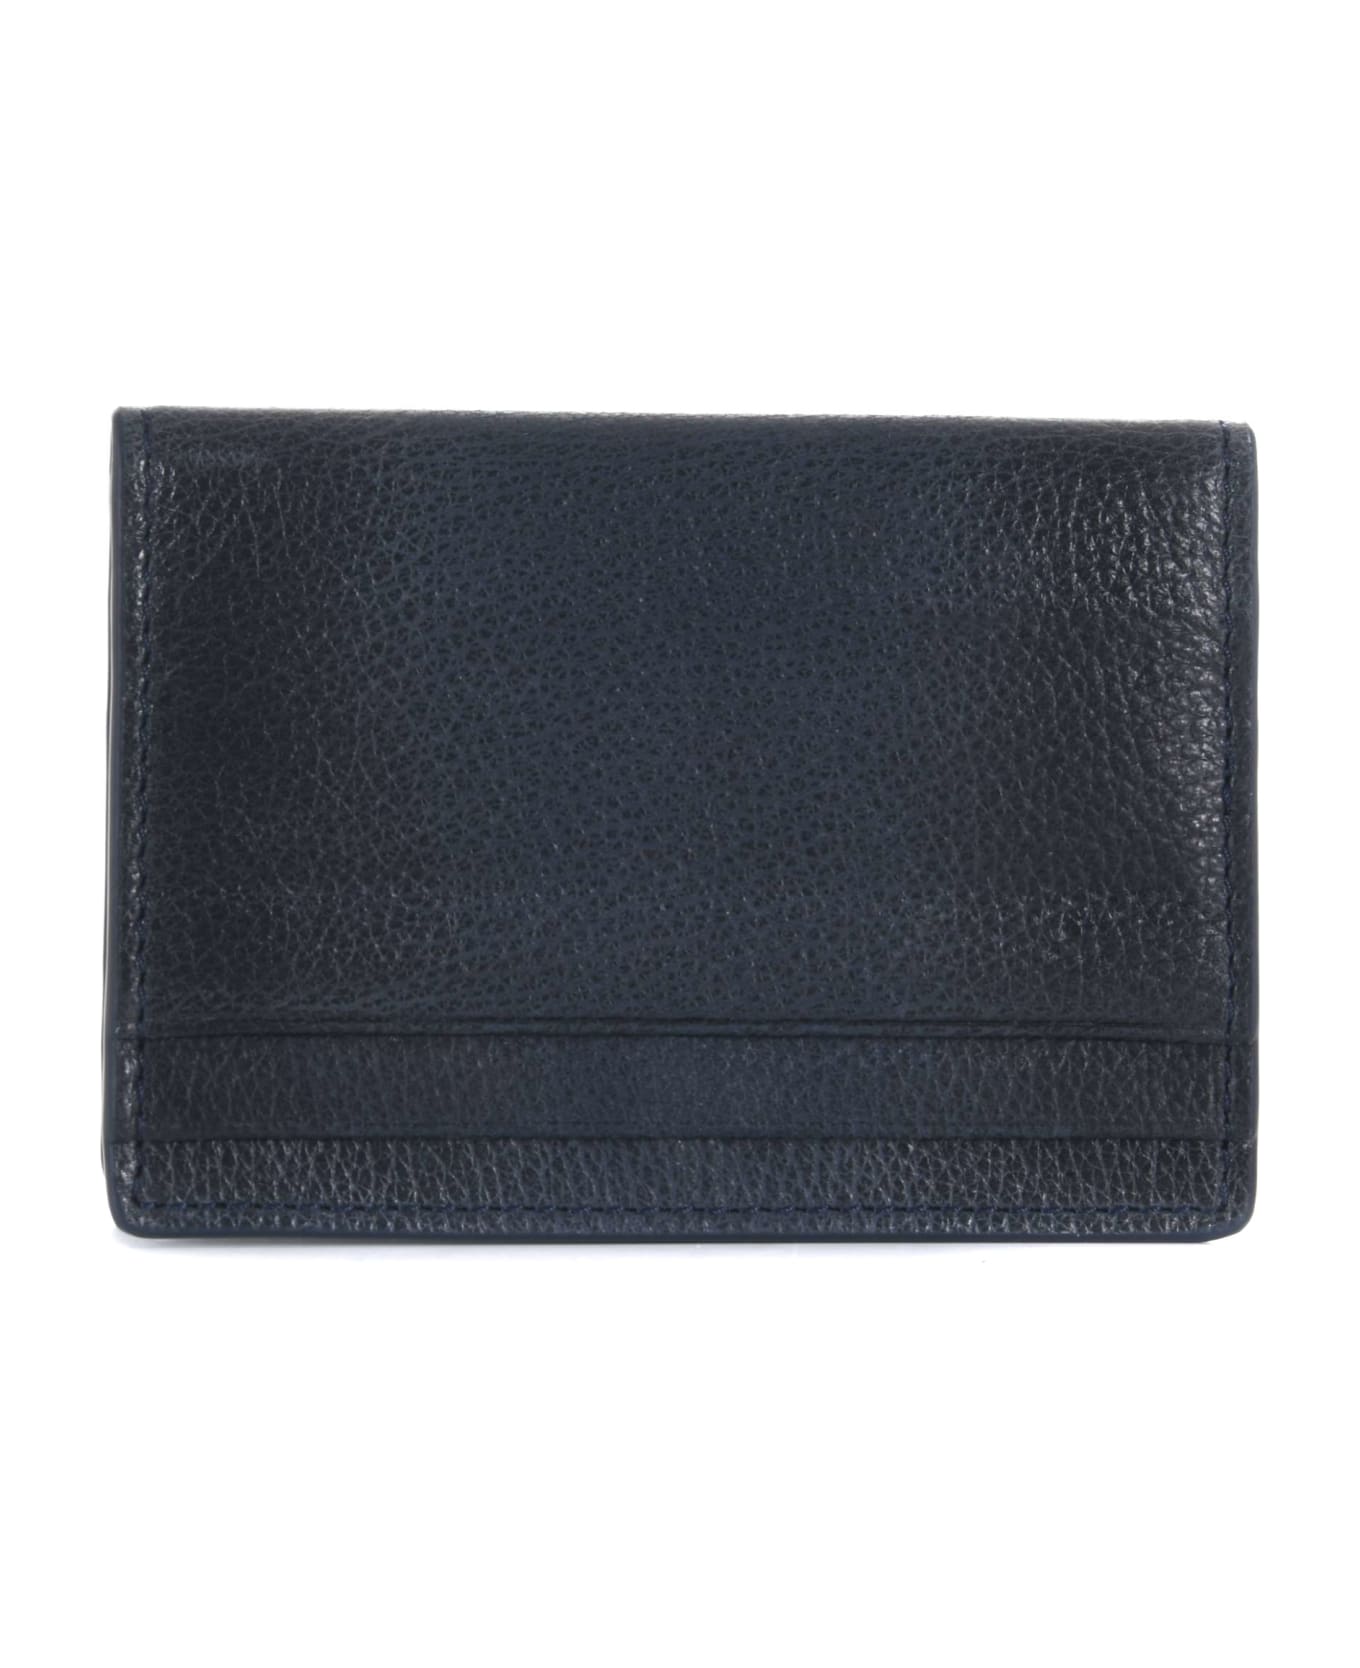 Orciani Card Holder - Blu scuro トラベルバッグ